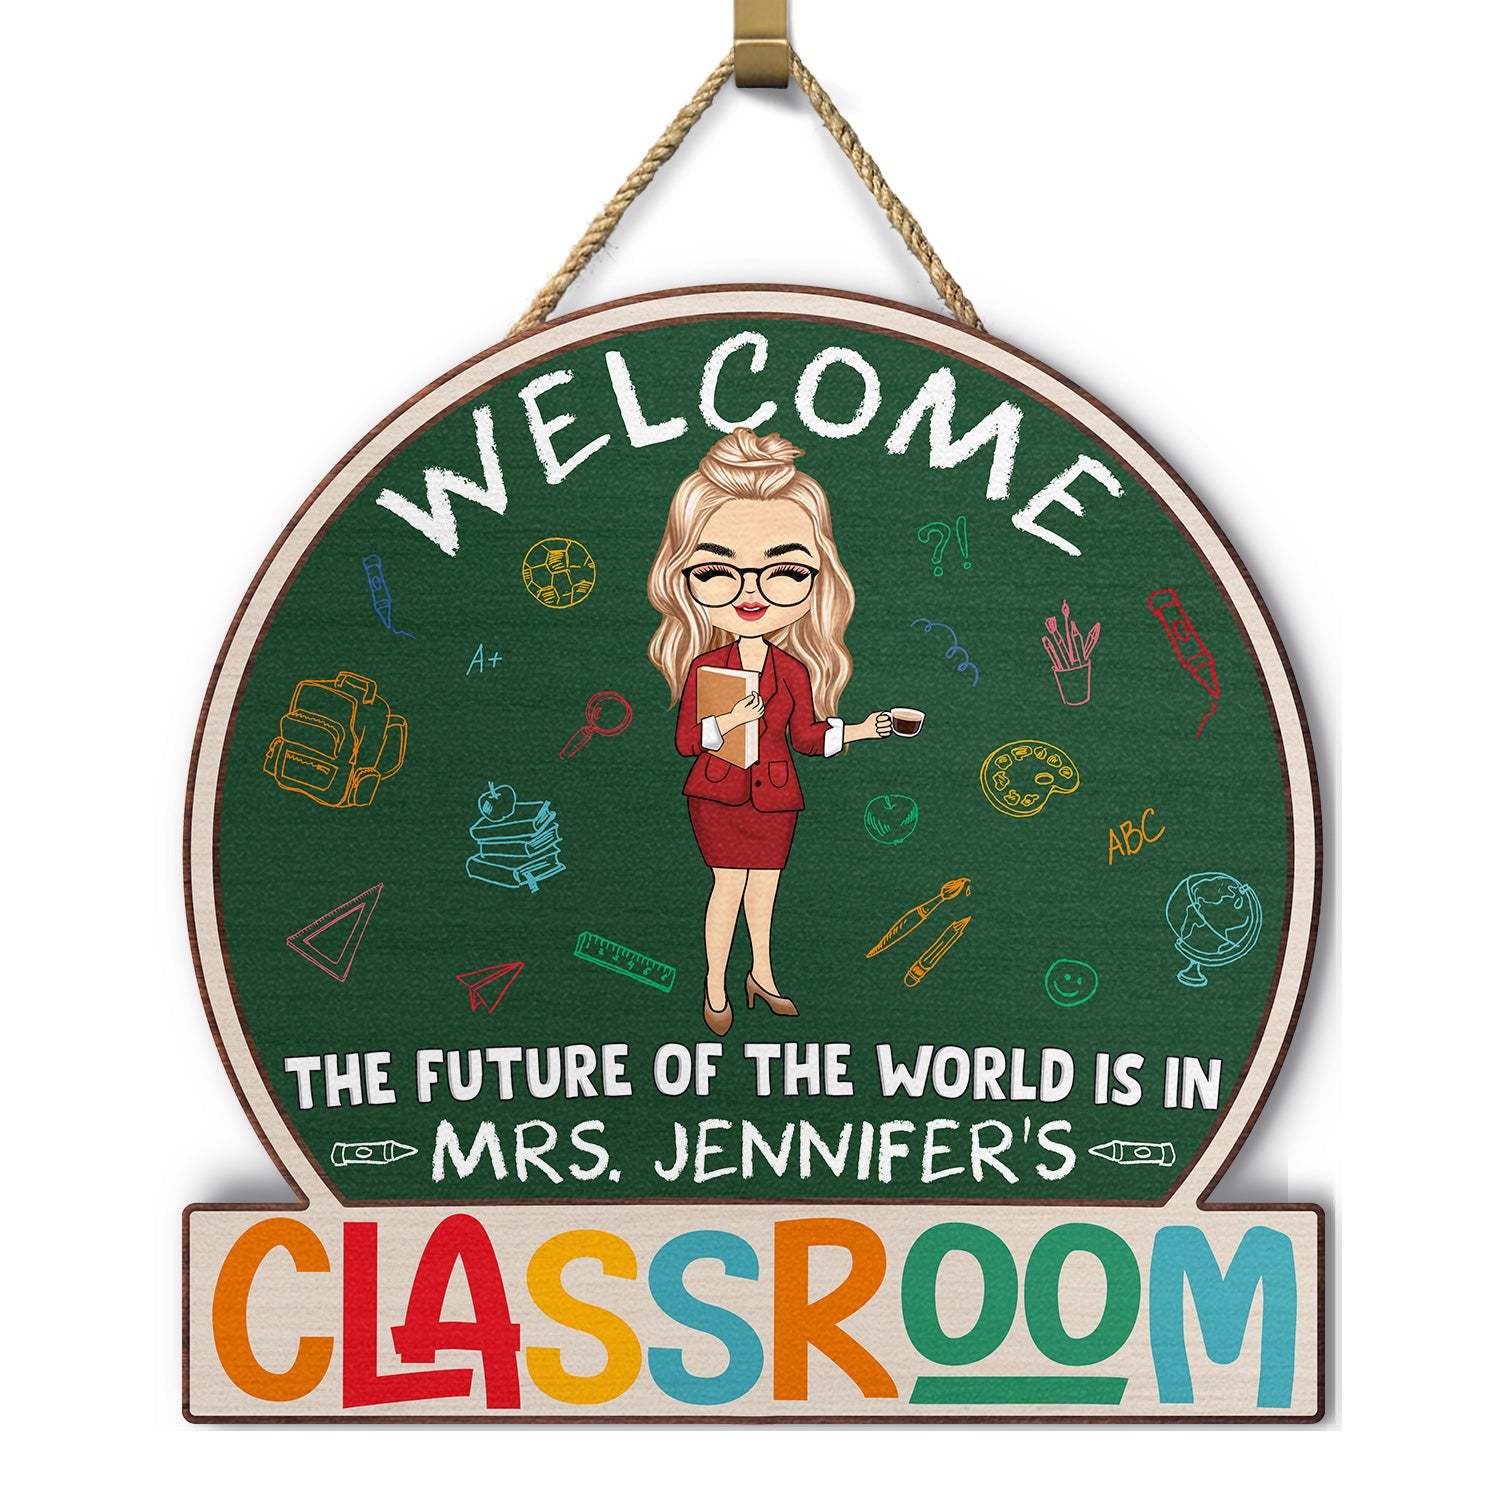 The Future Of The World Is In My Classroom - Gift For Teacher - Personalized Custom Shaped Wood Sign